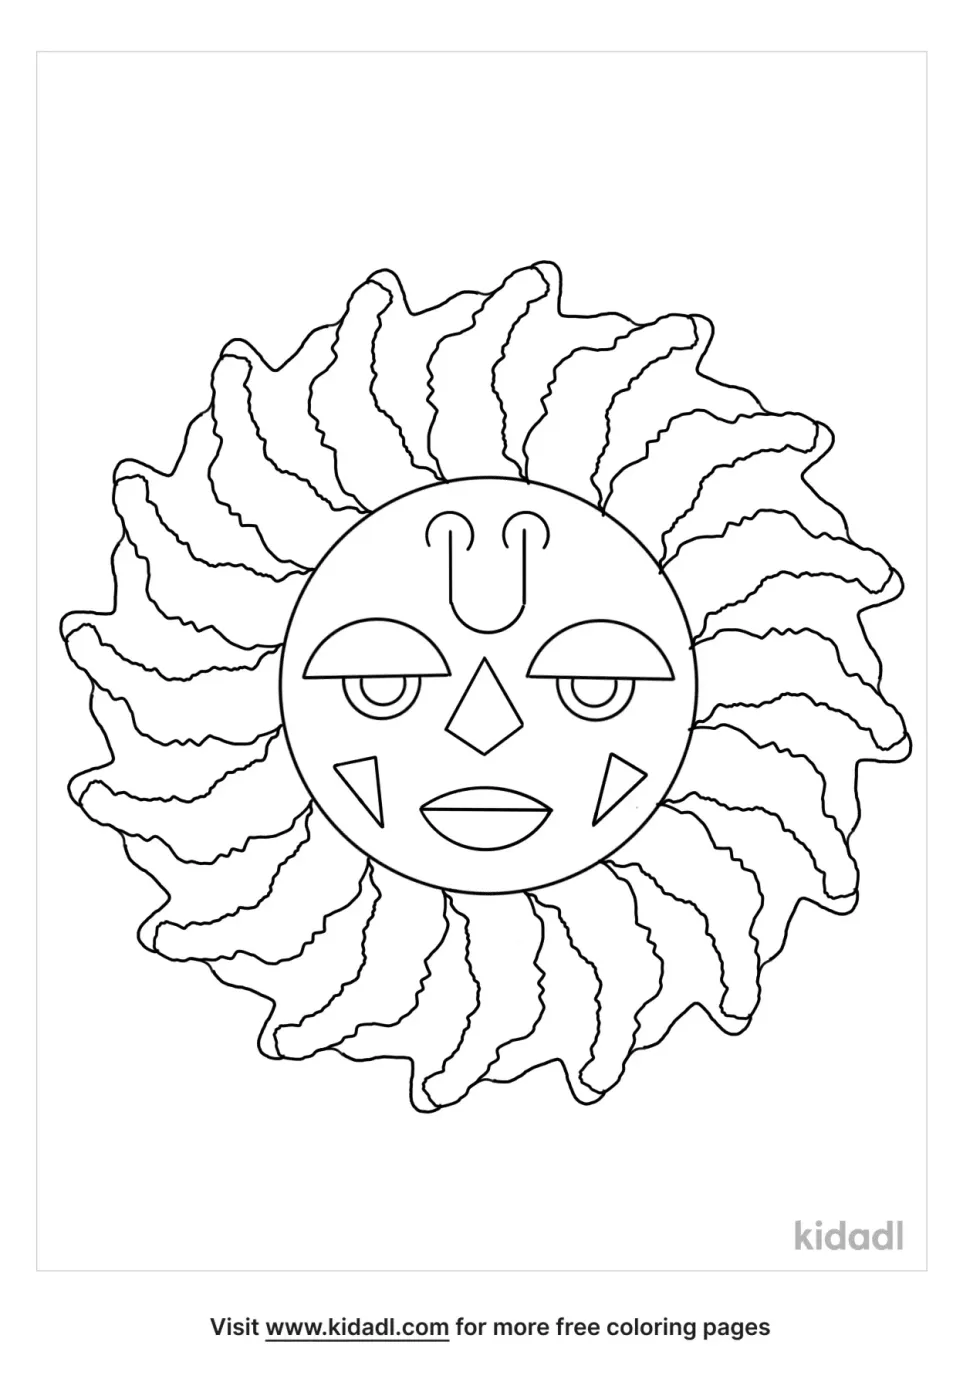 Tribal Sun Coloring Page